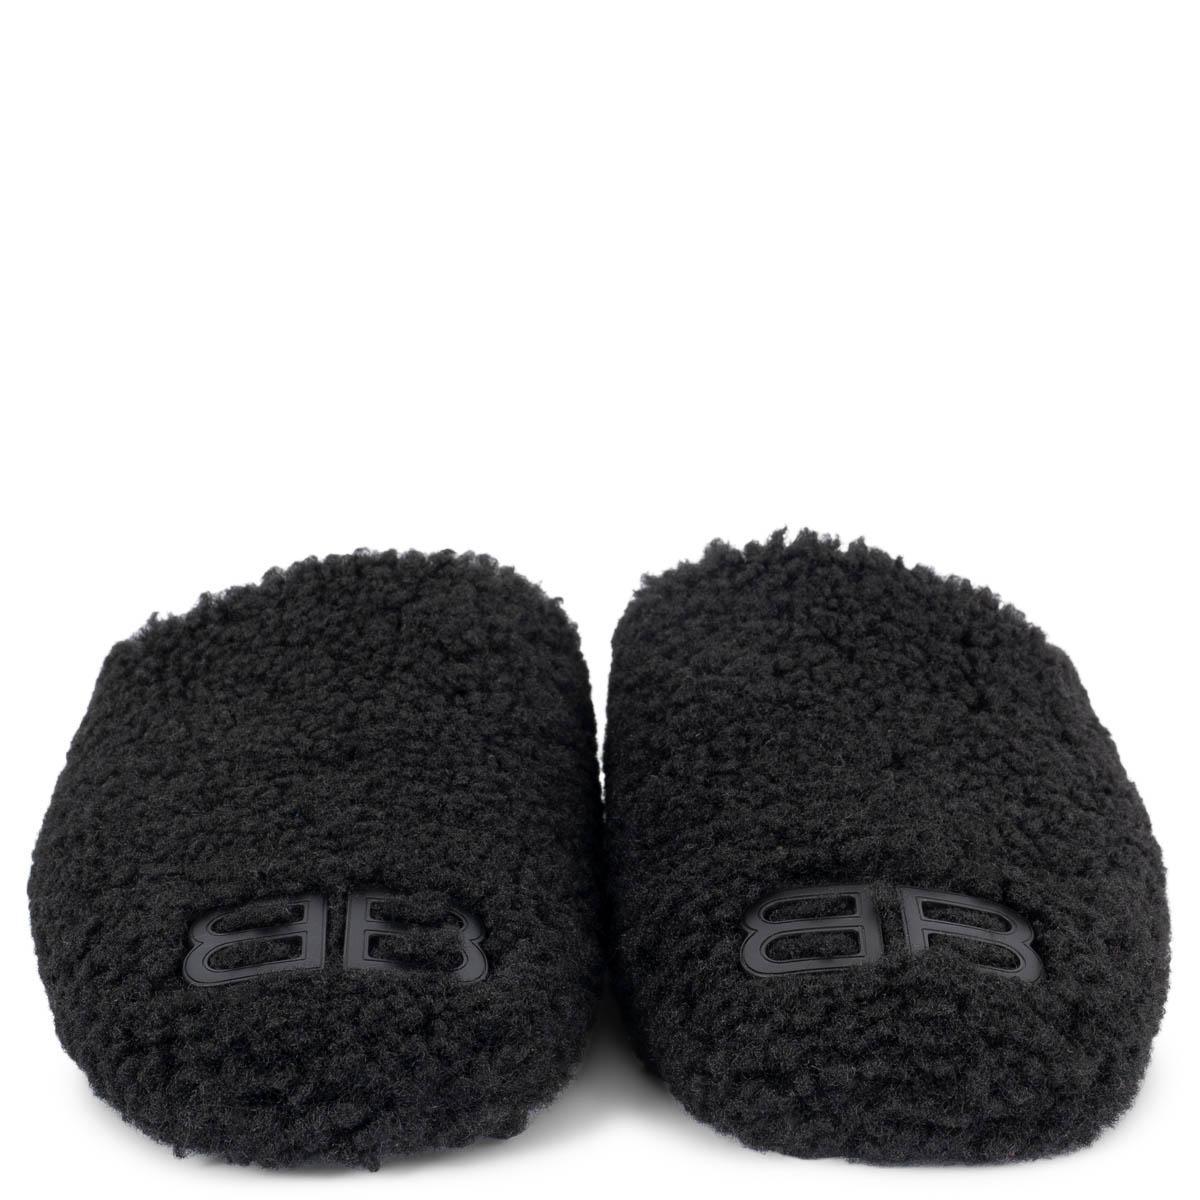 100% authentic Balenciaga Cosy BB slippers in black faux shearling with BB logo on tip. Have been worn once and are in virtually new condition. Come with dust bags. 

Measurements
Imprinted Size	38
Shoe Size	38
Inside Sole	25.5cm (9.9in)
Width	8cm